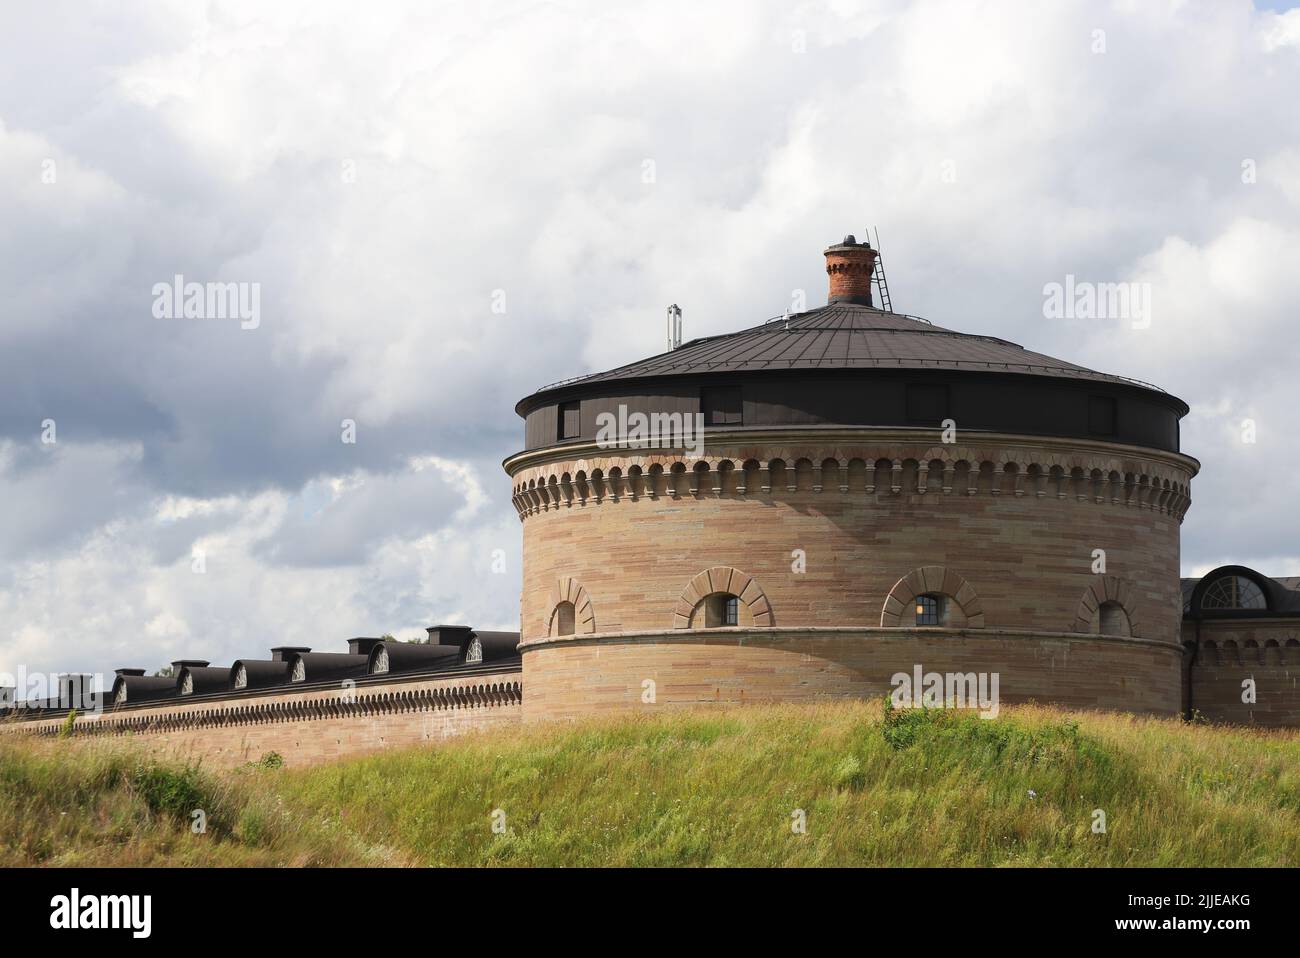 The southern tower of the 19th century Karlsborg fortress located in the Swedish province Vastergotland. Stock Photo